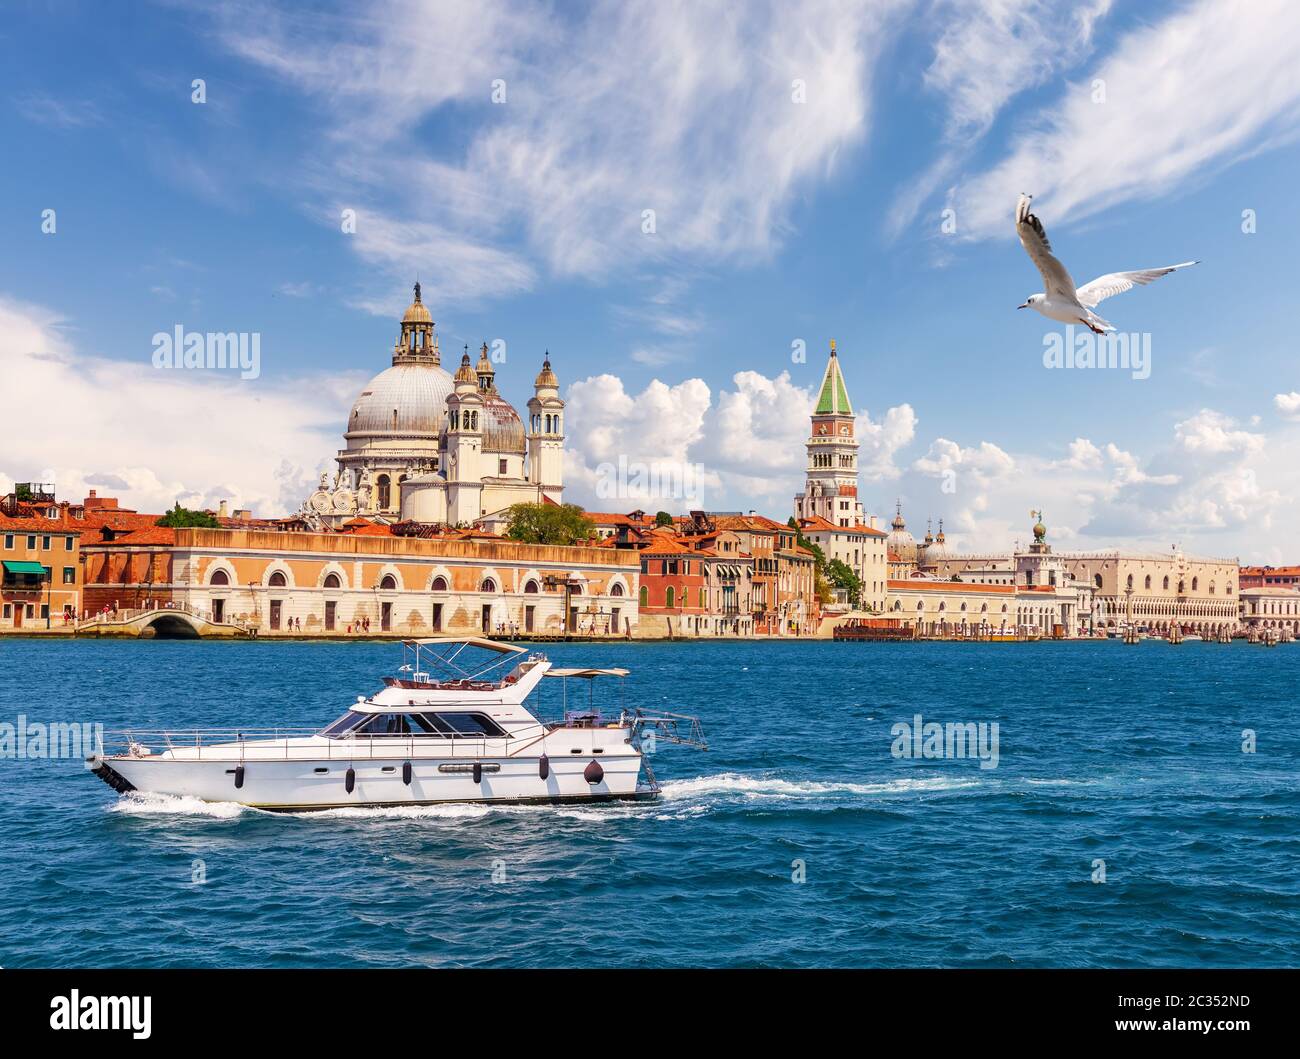 The Salute Church, St Mark's Campanile and Doge's Palace, Venice, Italy. Stock Photo